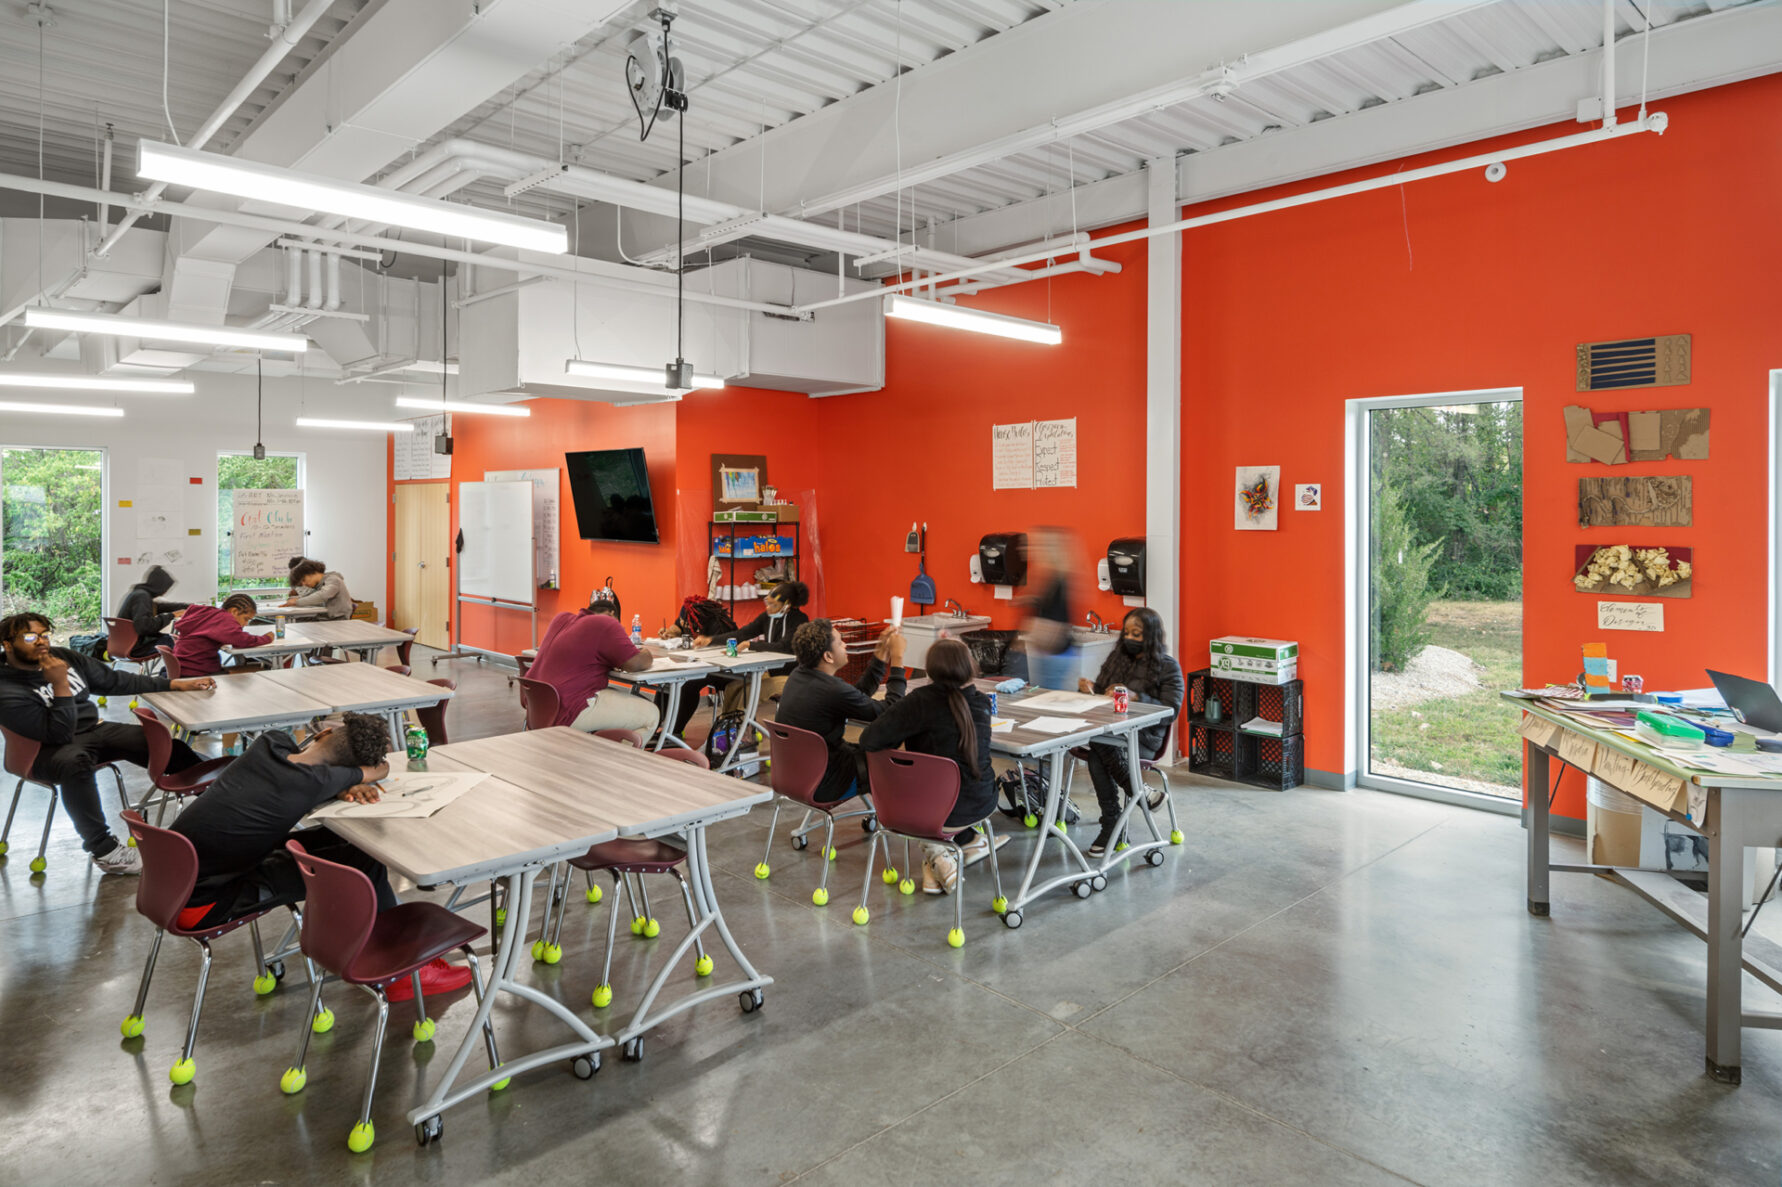 Students learning in a classroom at Hogan Prep High School, built by McCownGordon Construction